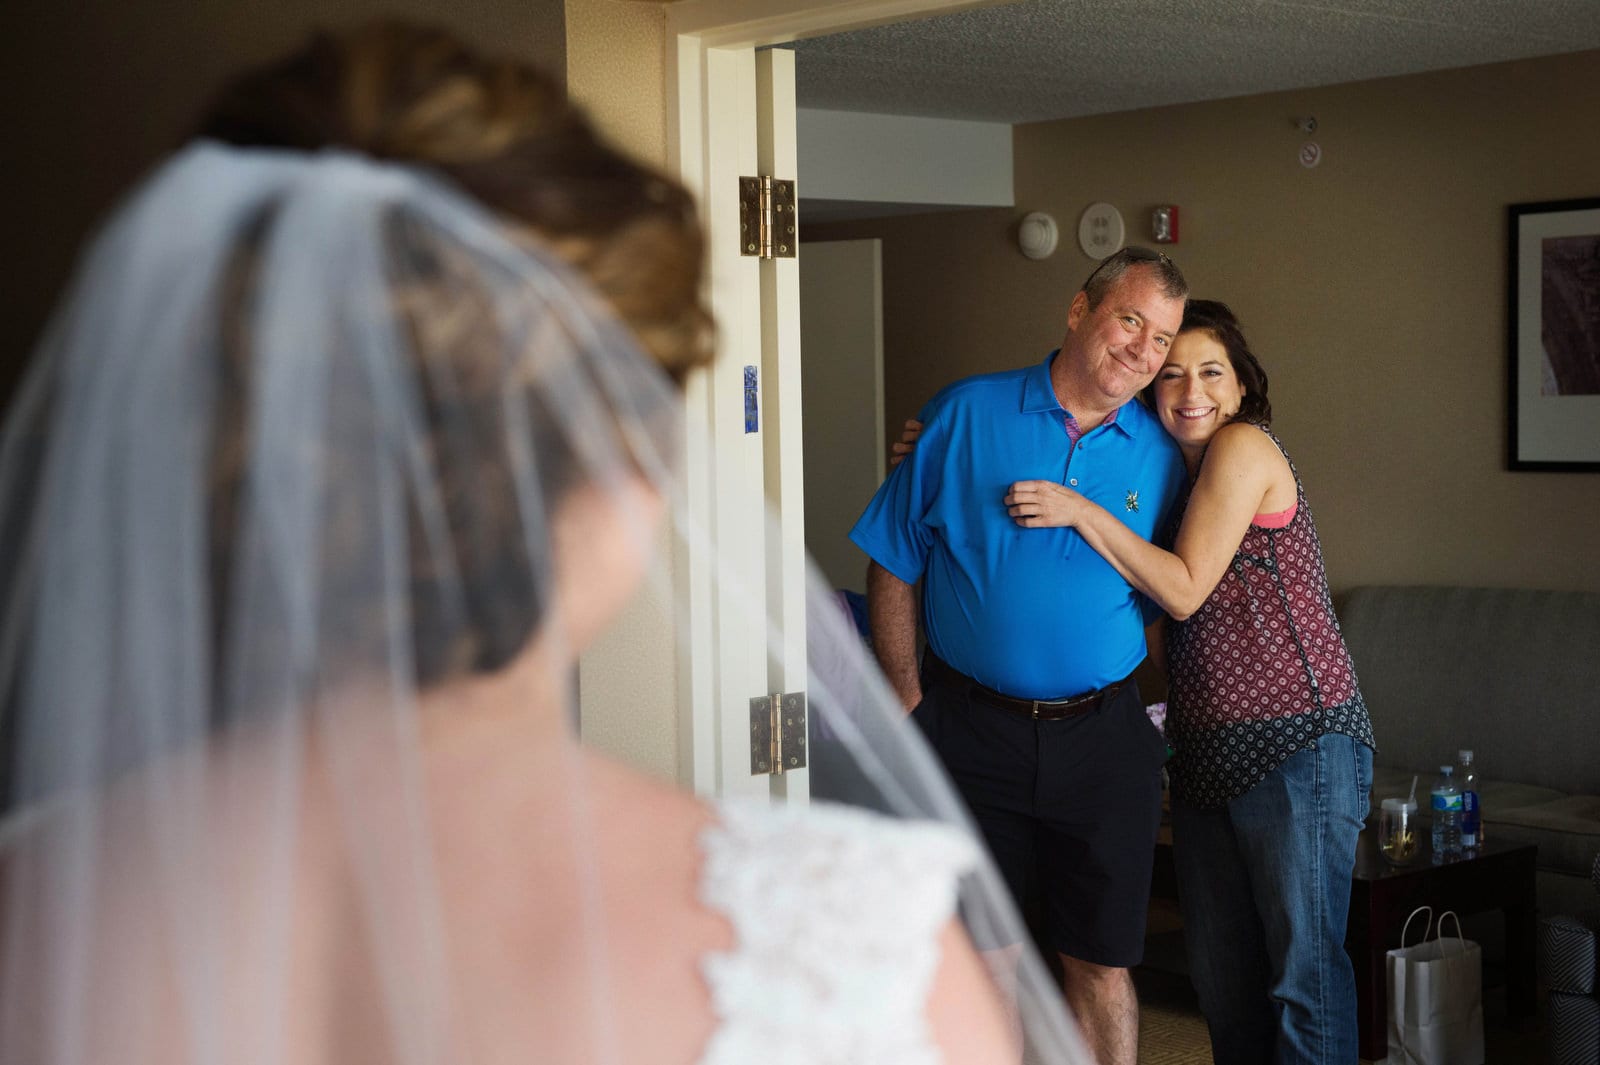 A bride seen from behind as her smiling parents embrace and look at her in her wedding dress.